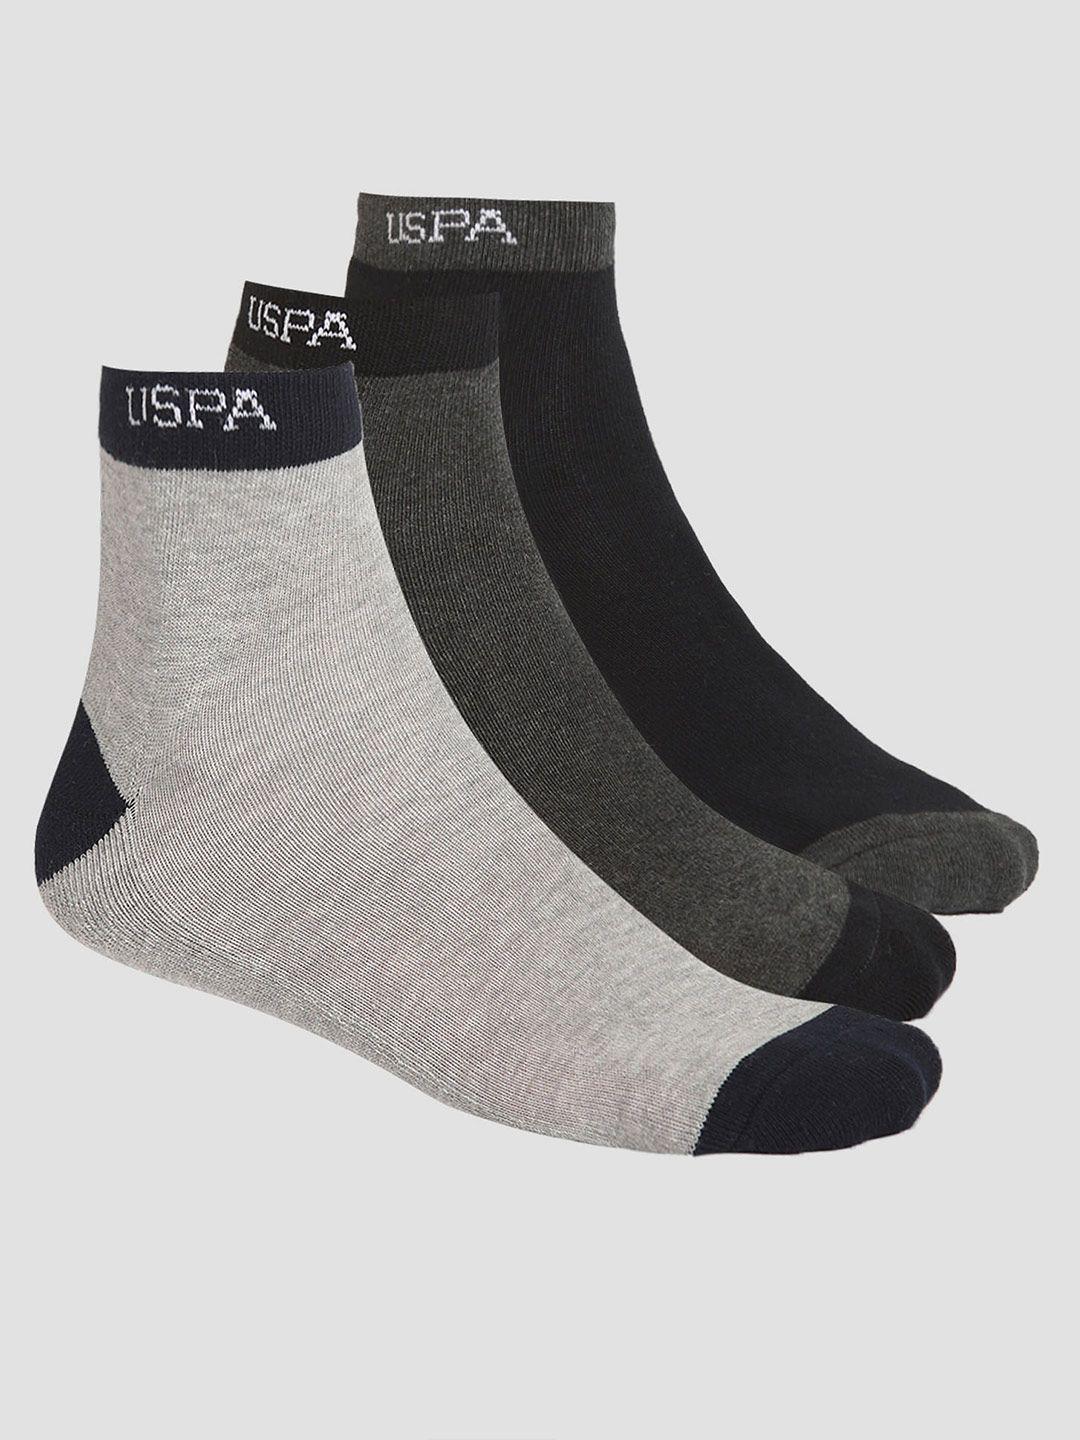 u.s. polo assn. men pack of 3 patterned anti microbial ankle length socks